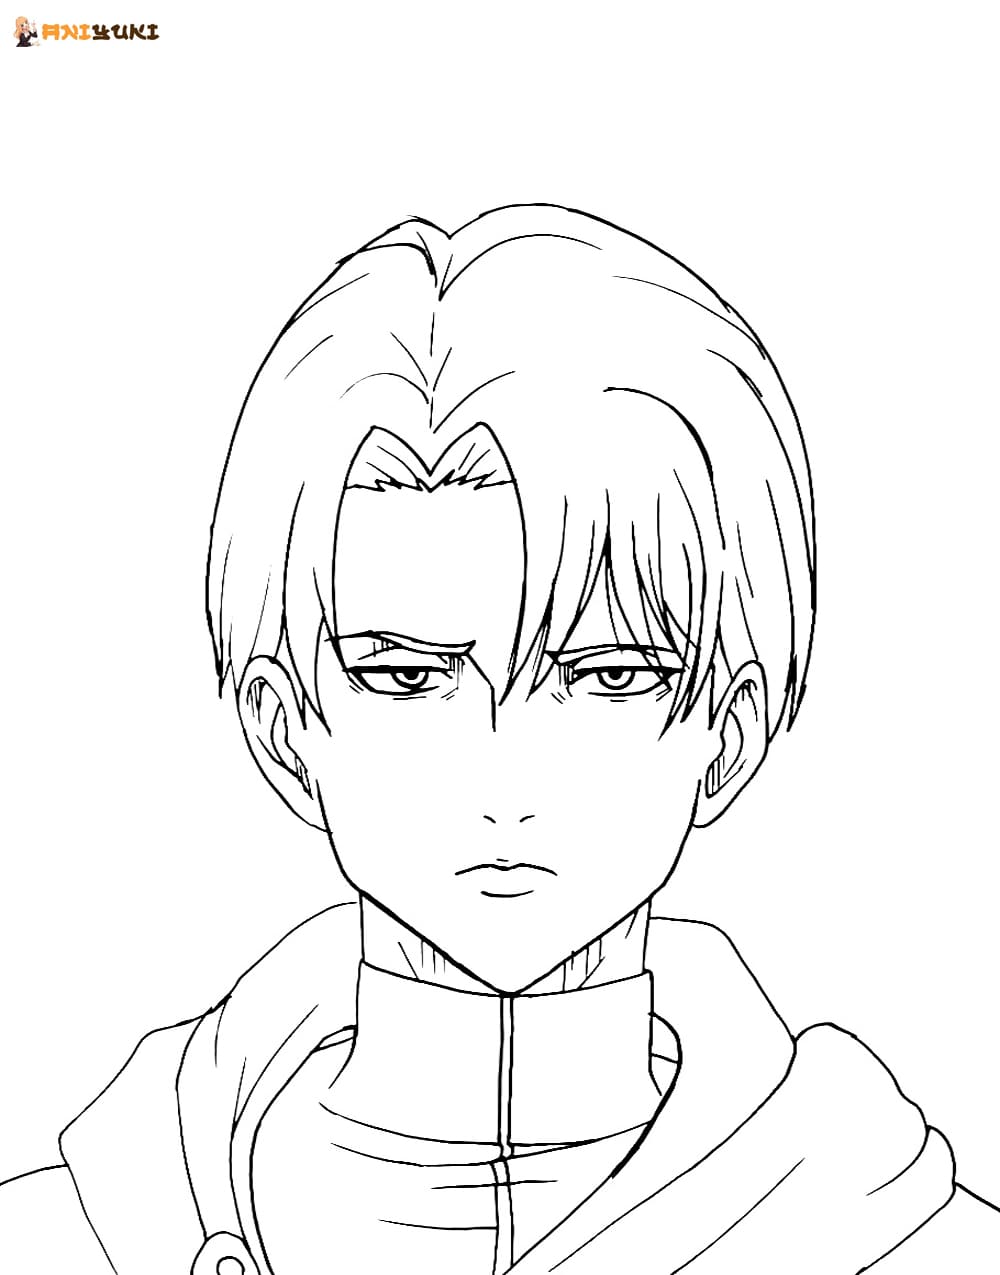 Levi Ackerman Coloring Pages - 50 Free Coloring Pages